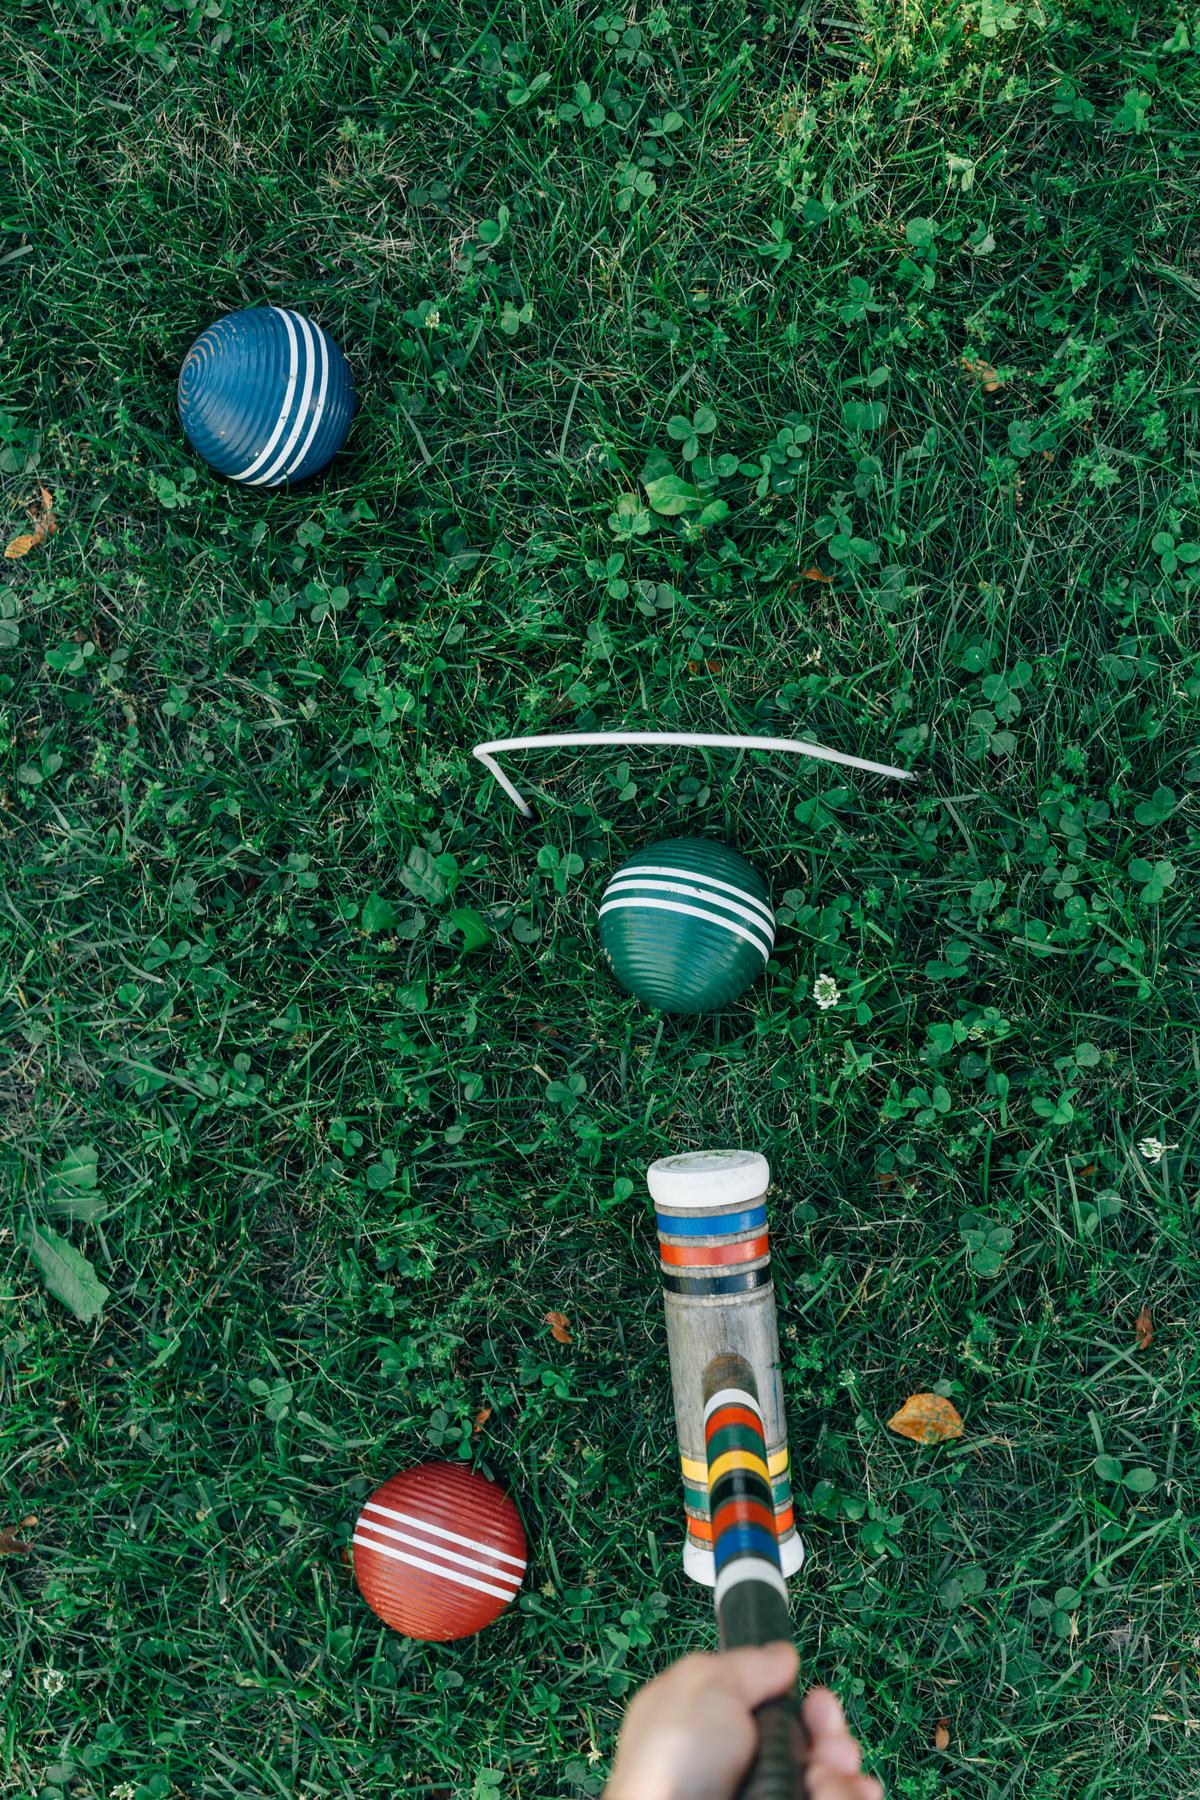 Image of a person playing croquet, focusing on hitting the ball with precision and strategy.